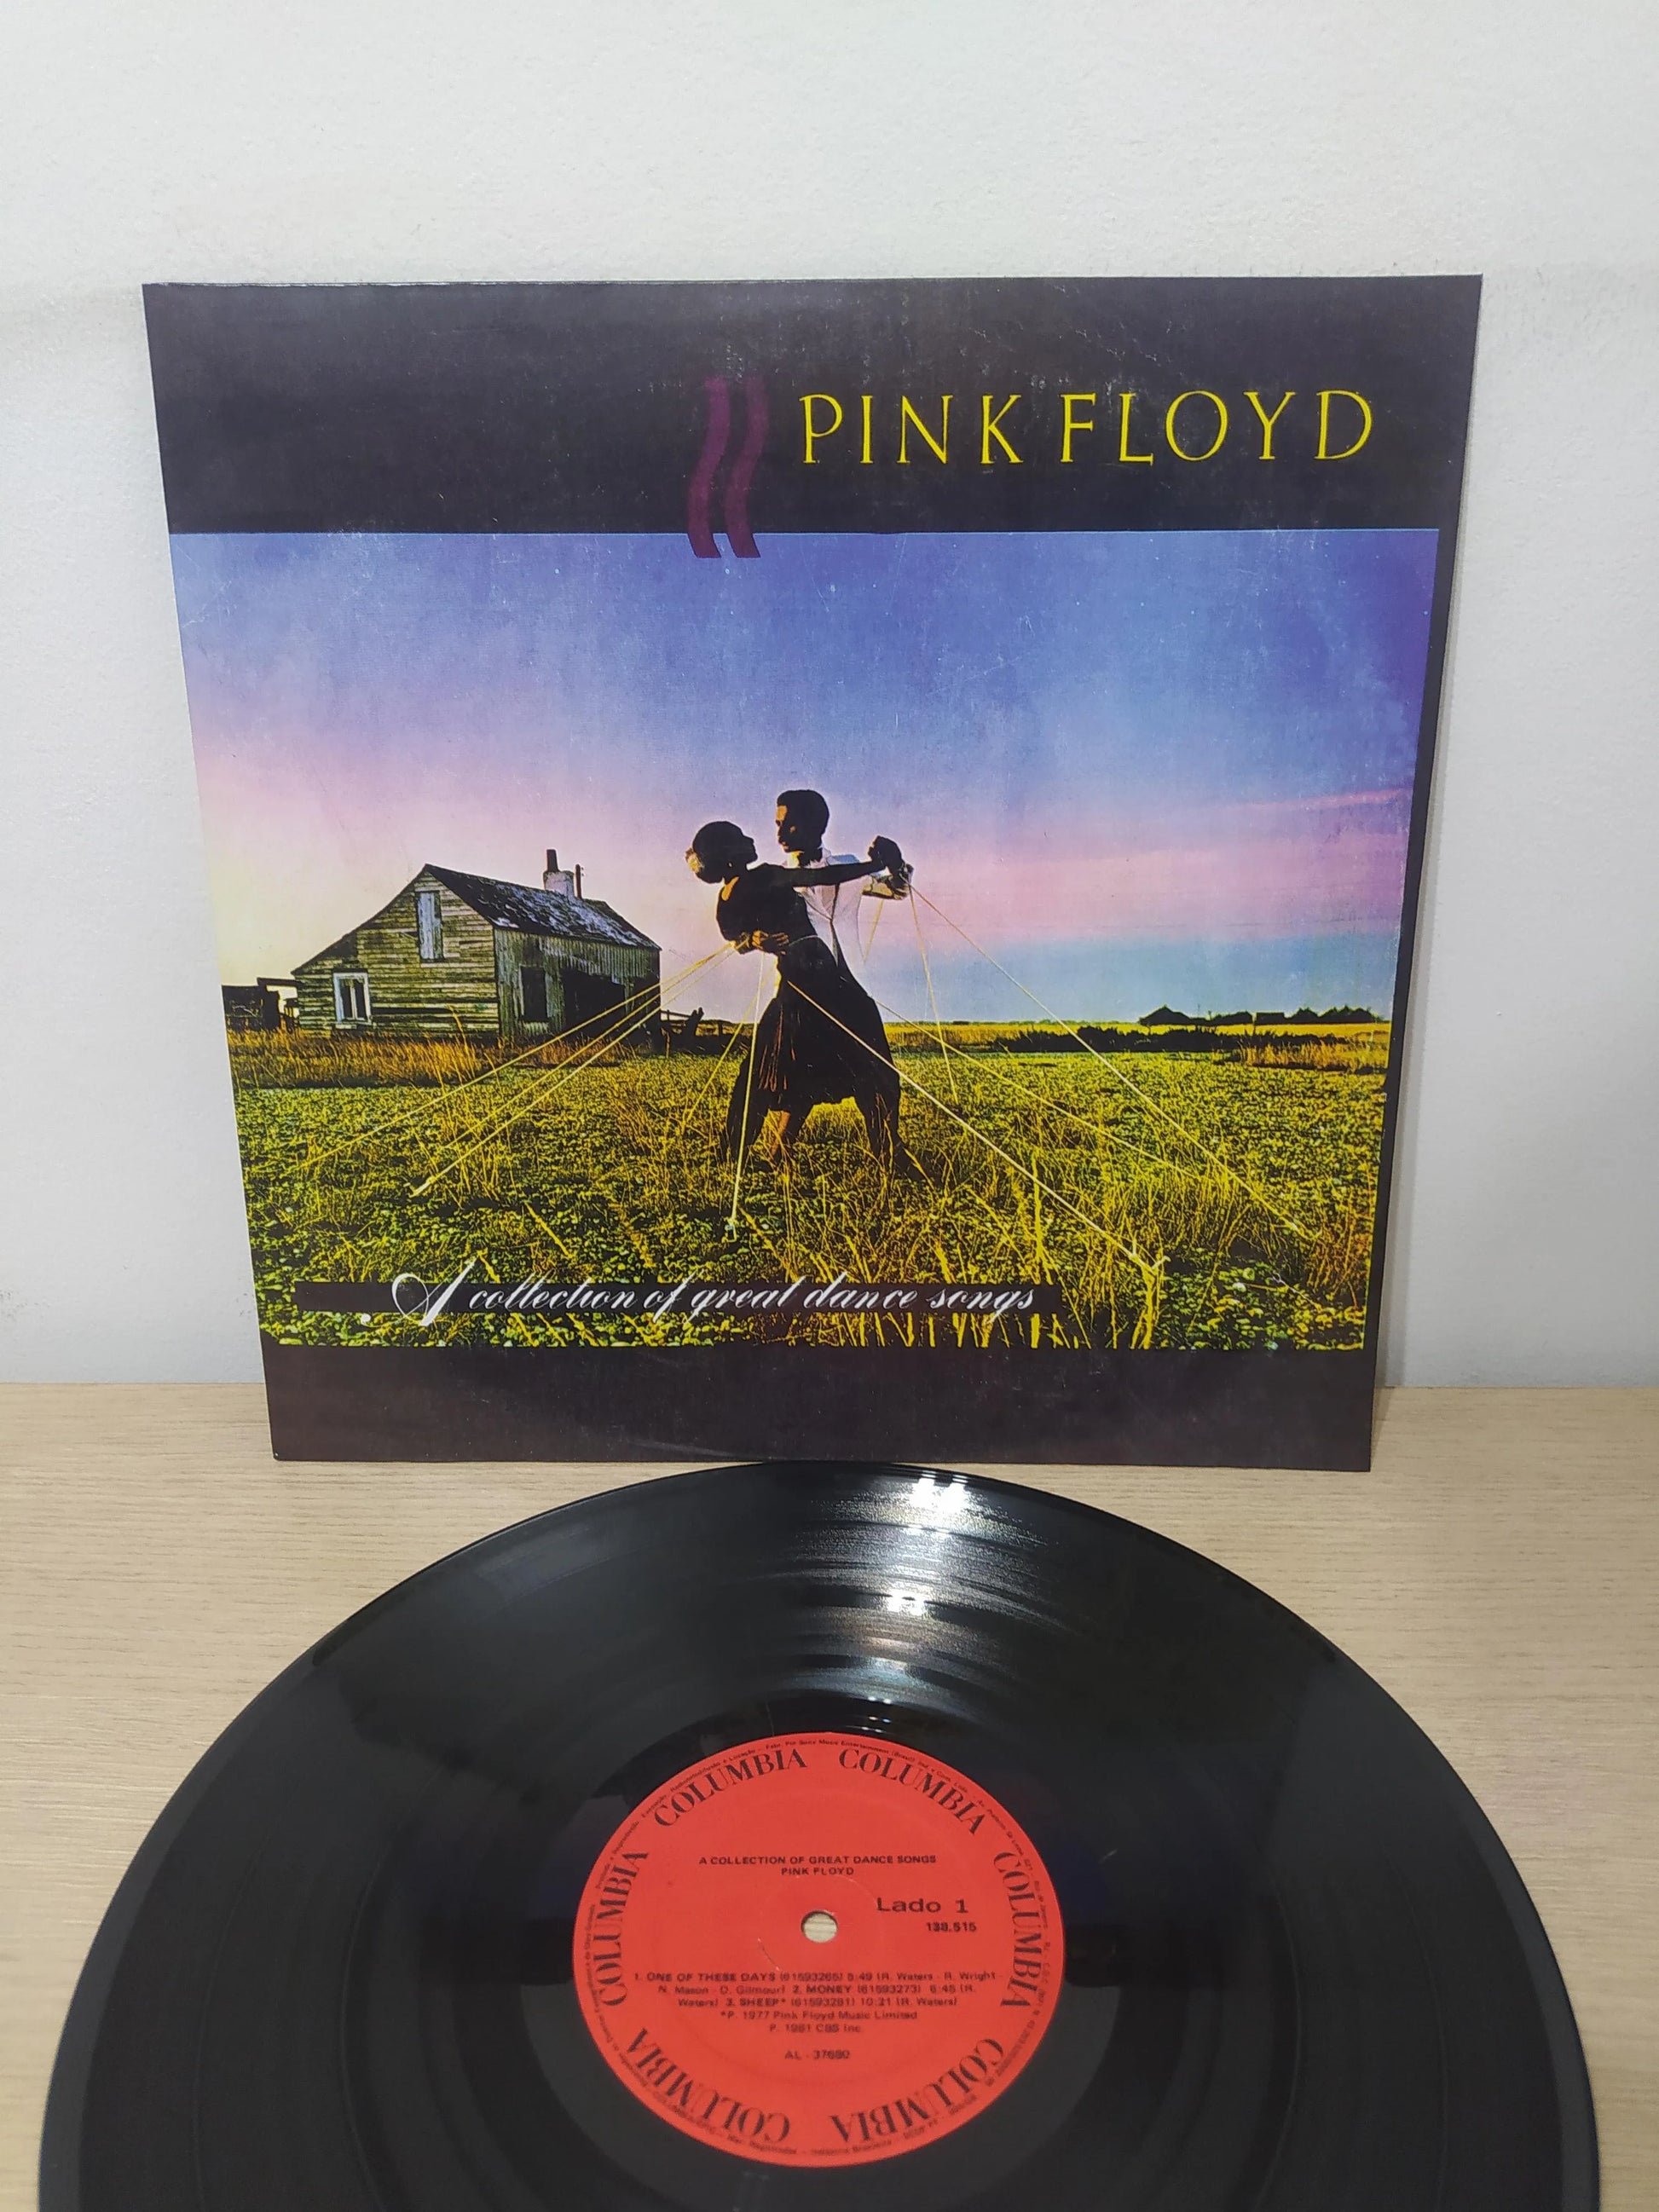 Bigstore - A Collection of Great Dance Songs (LP Vinyl) - Pink Floyd - 2017